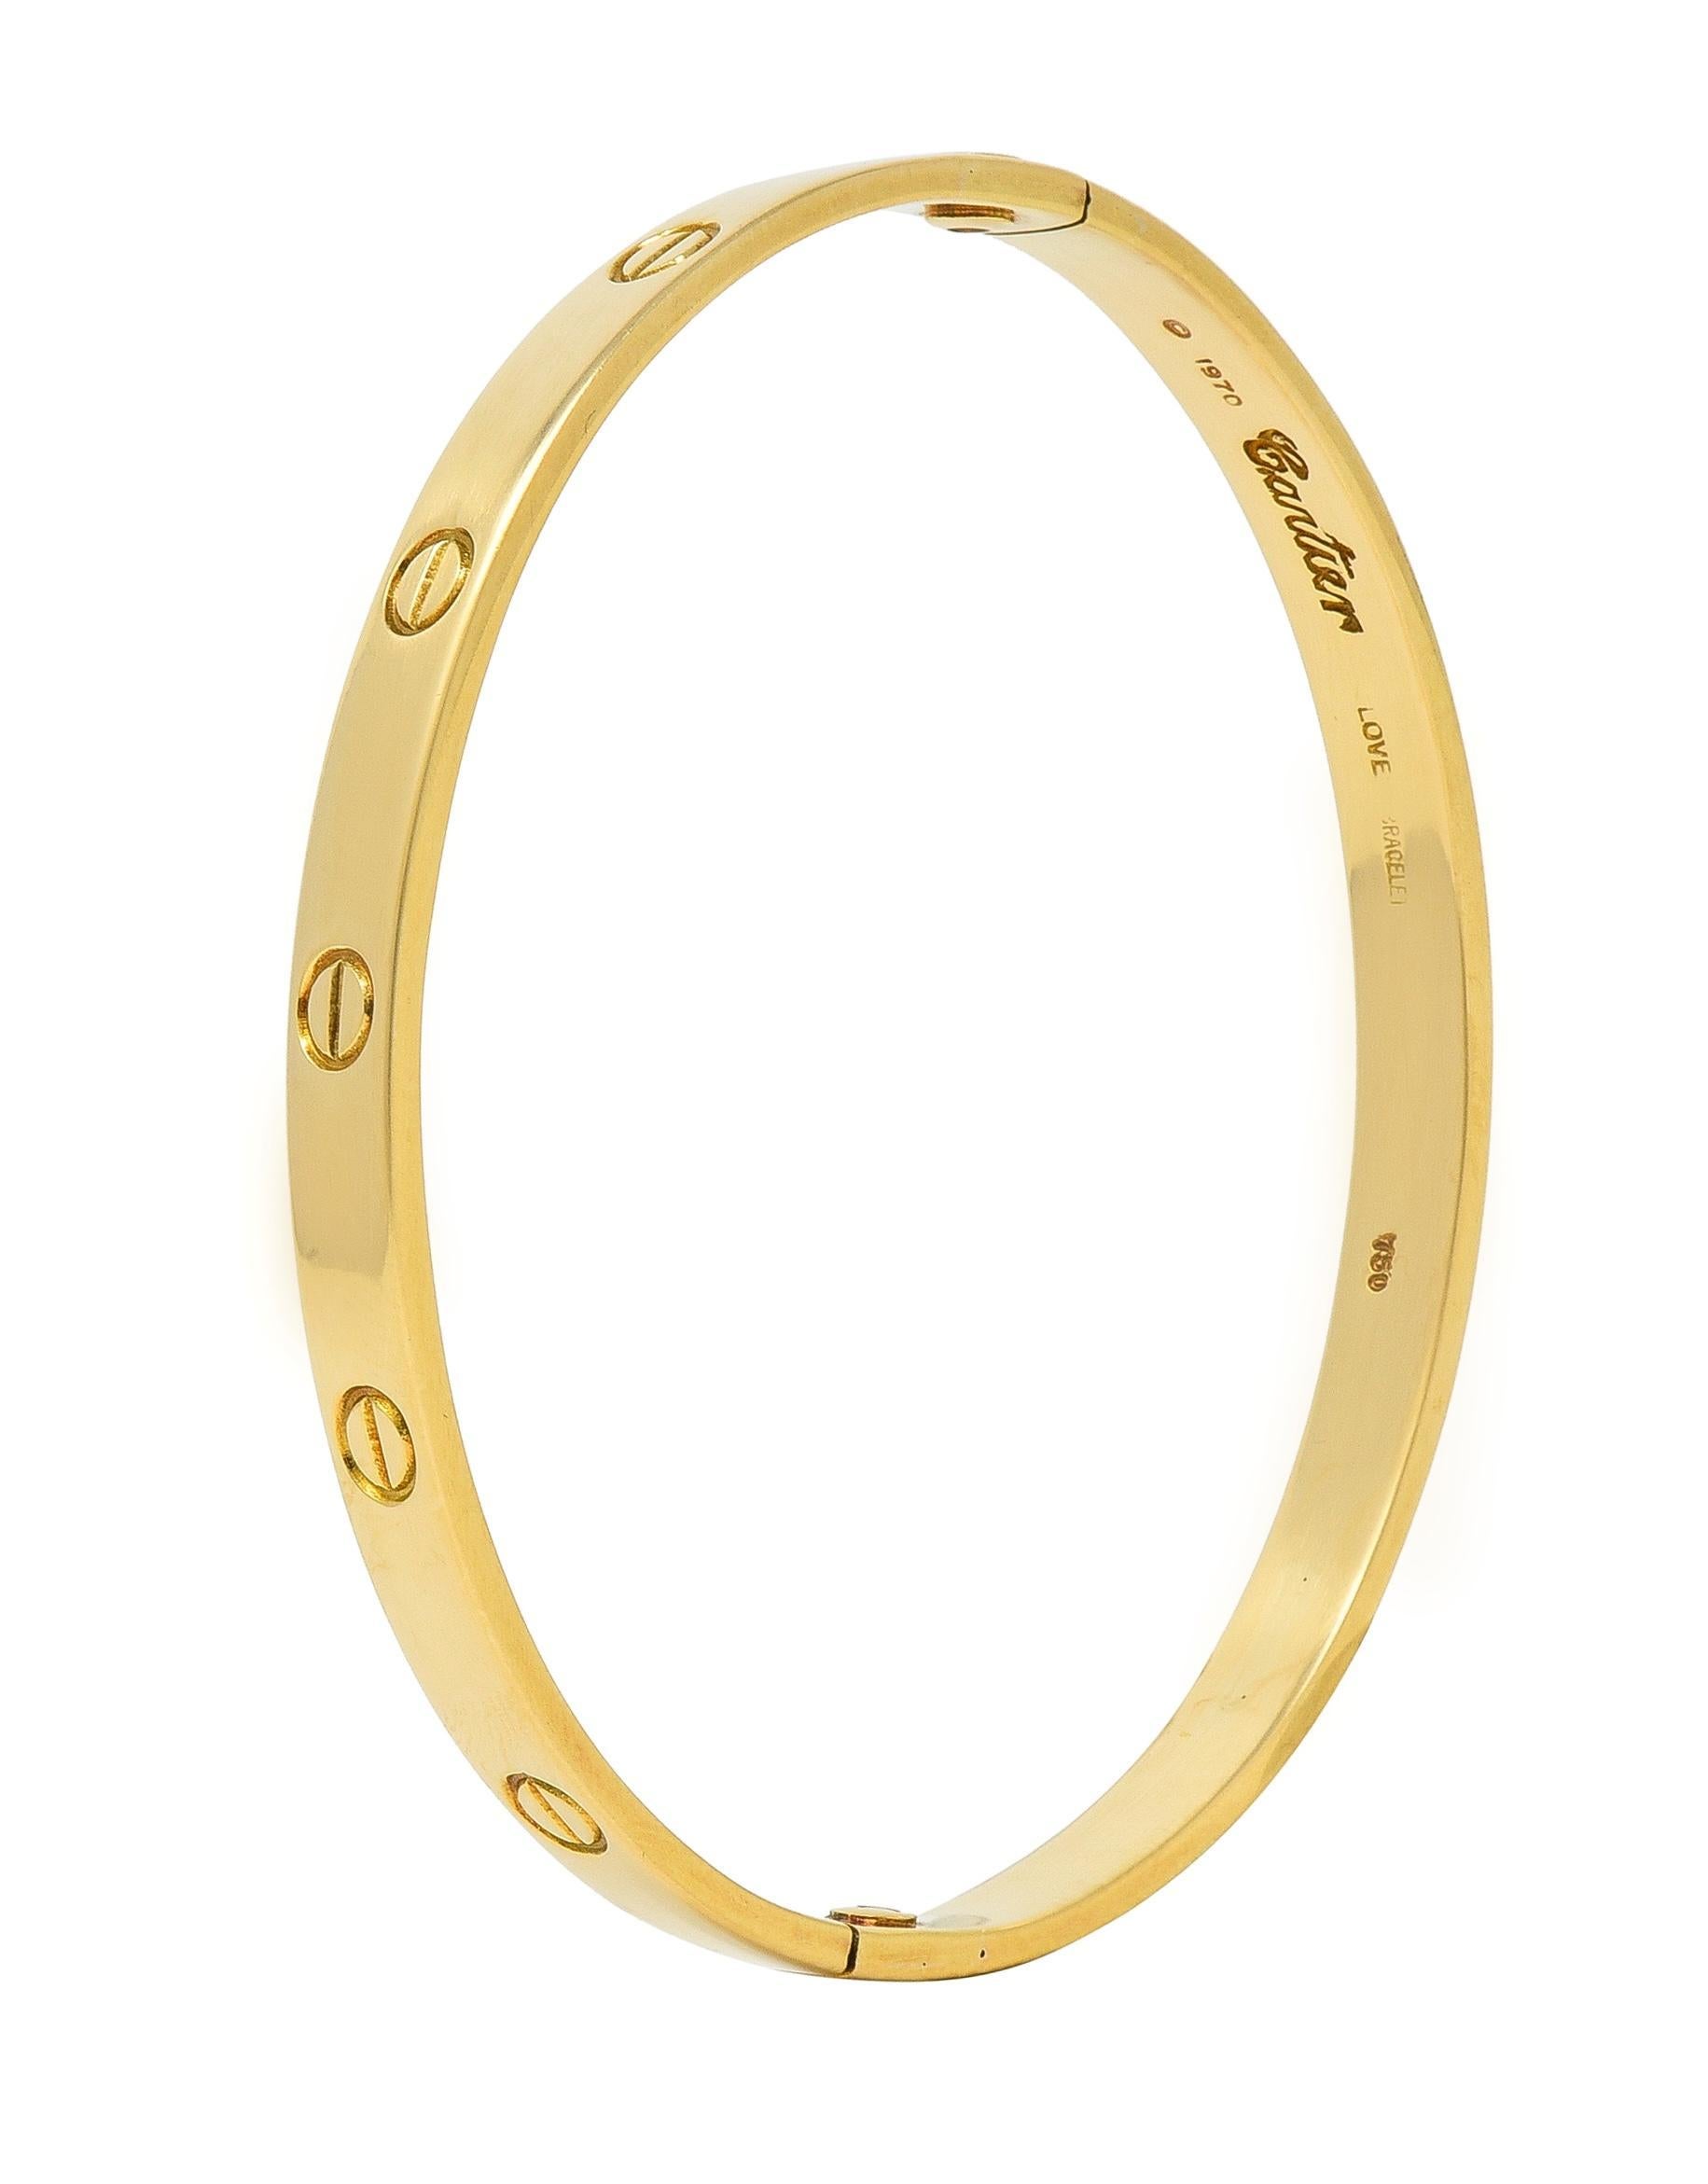 Designed as a bangle style bracelet deeply engraved with iconic screw head motif
With a high polished finish
Opens via two removable screws
From the coveted Love collection
Numbered and fully signed Cartier
Stamped  1970 Cartier Love Bracelet